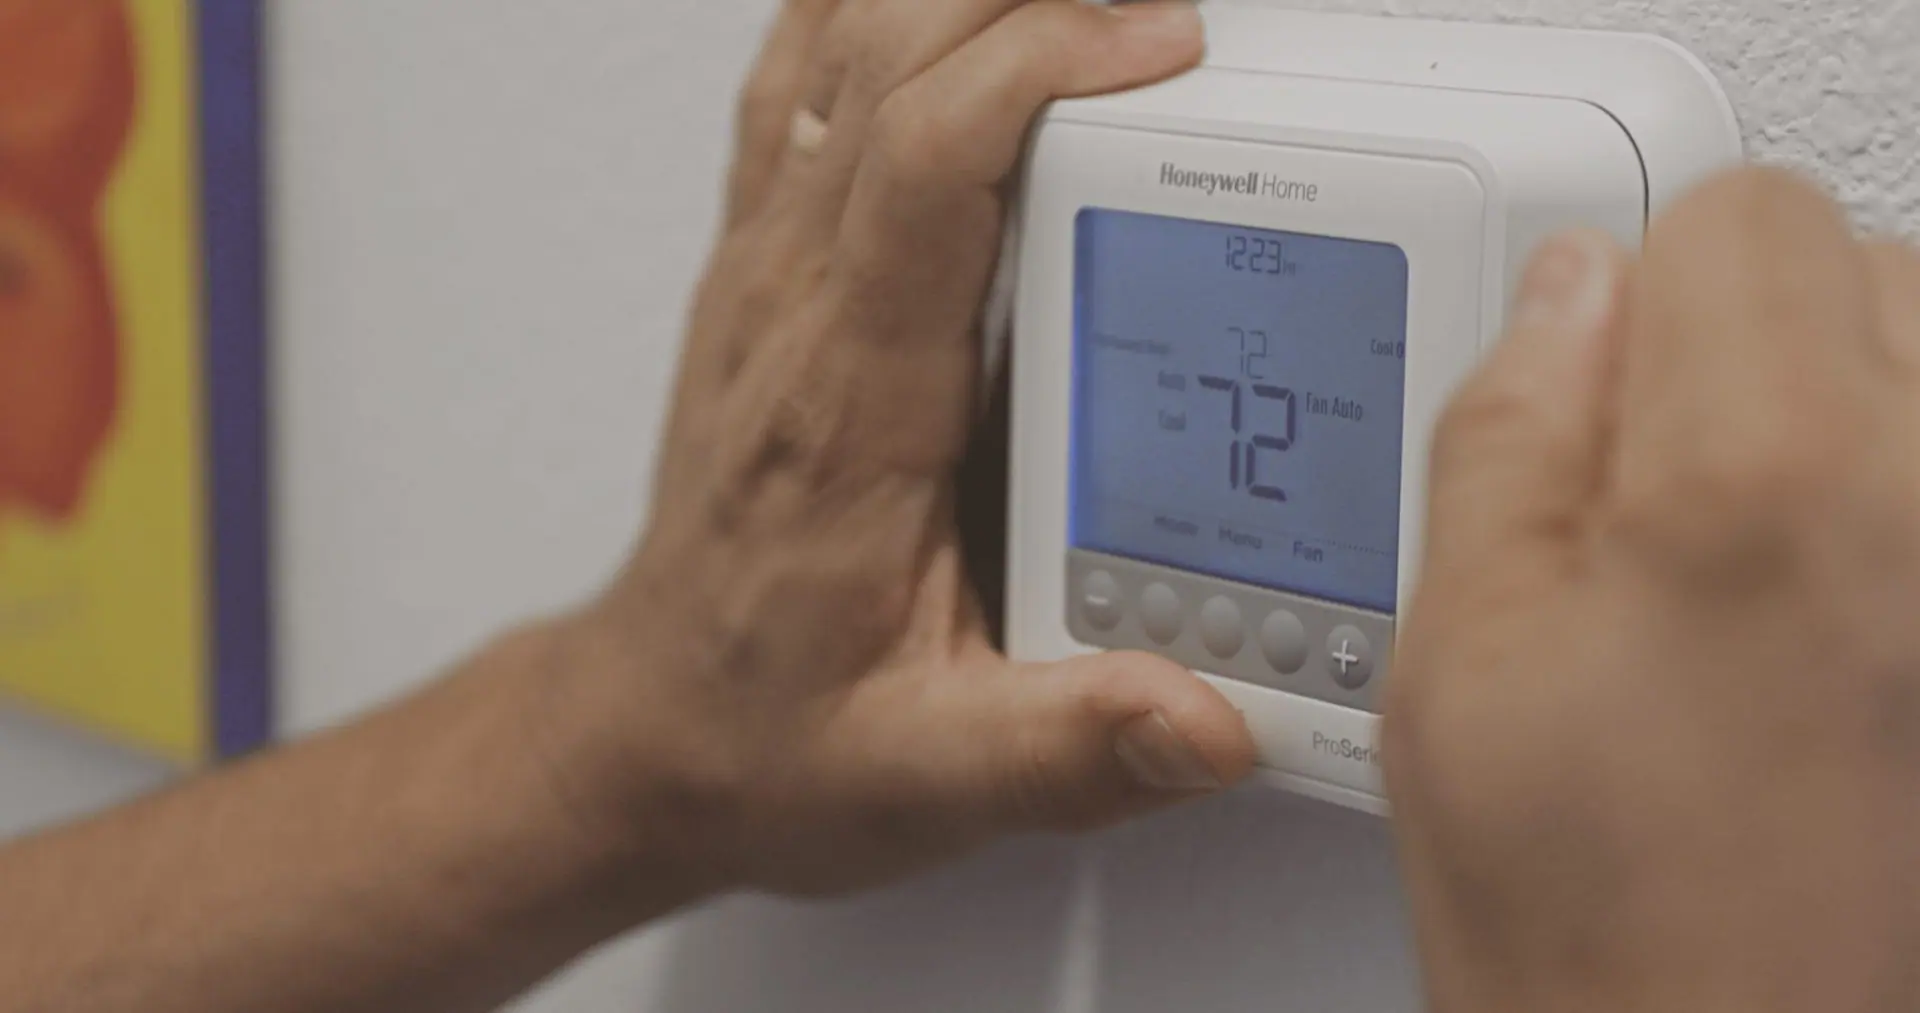 Close-up of Honeywell Home thermostat